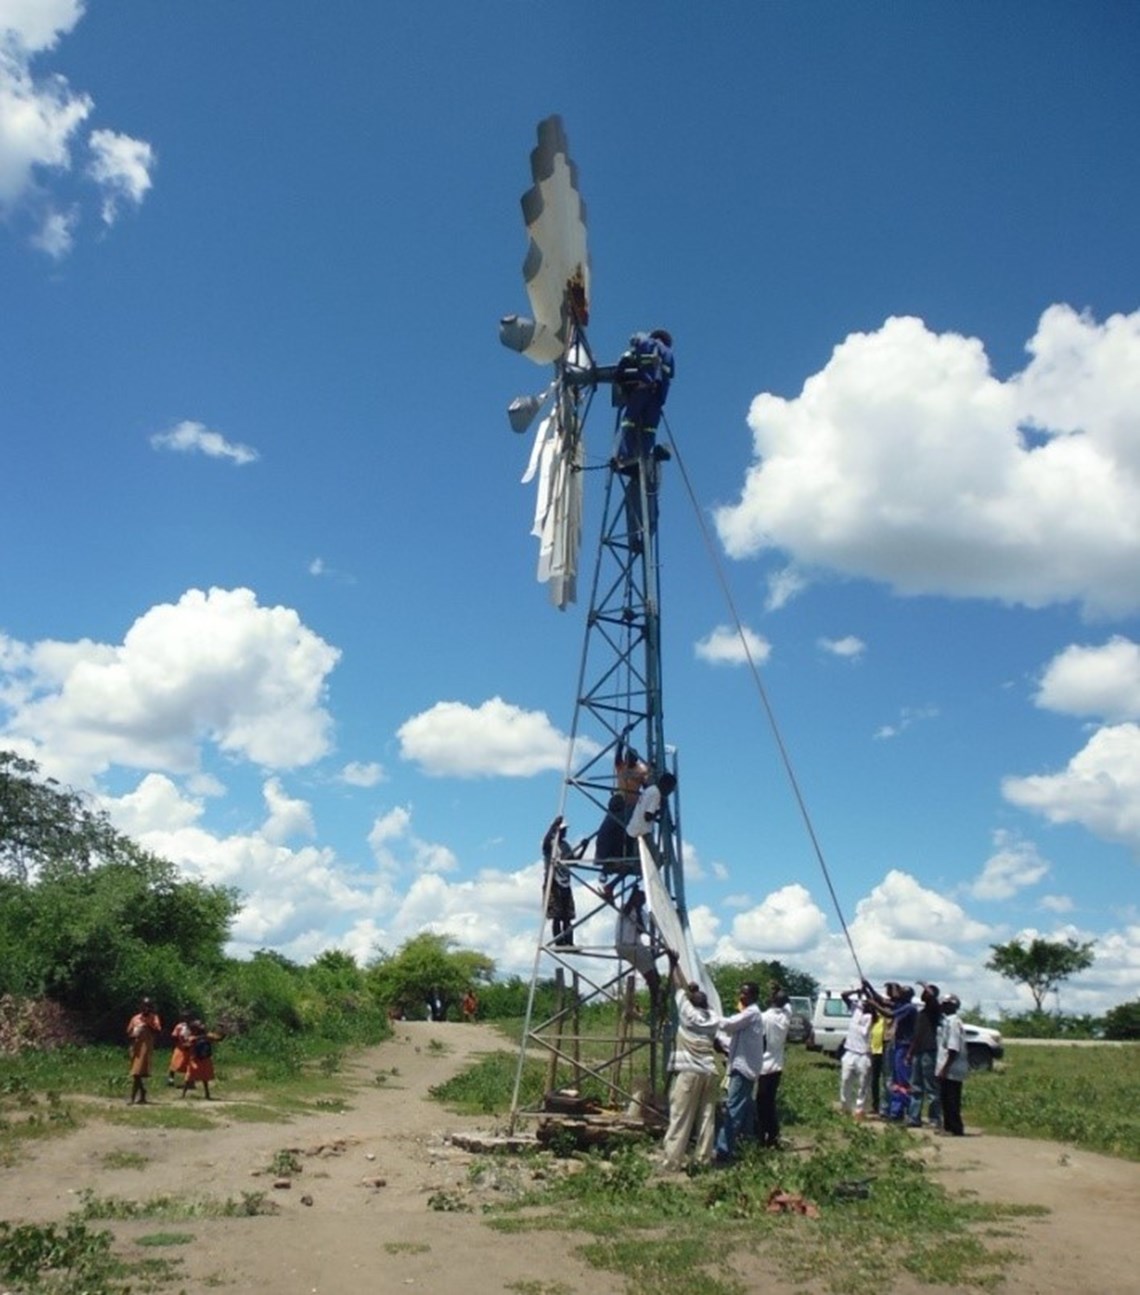 Children from the primary school (left) walk past the windmill as the local community begin to hoist the final part, HALO Trust.